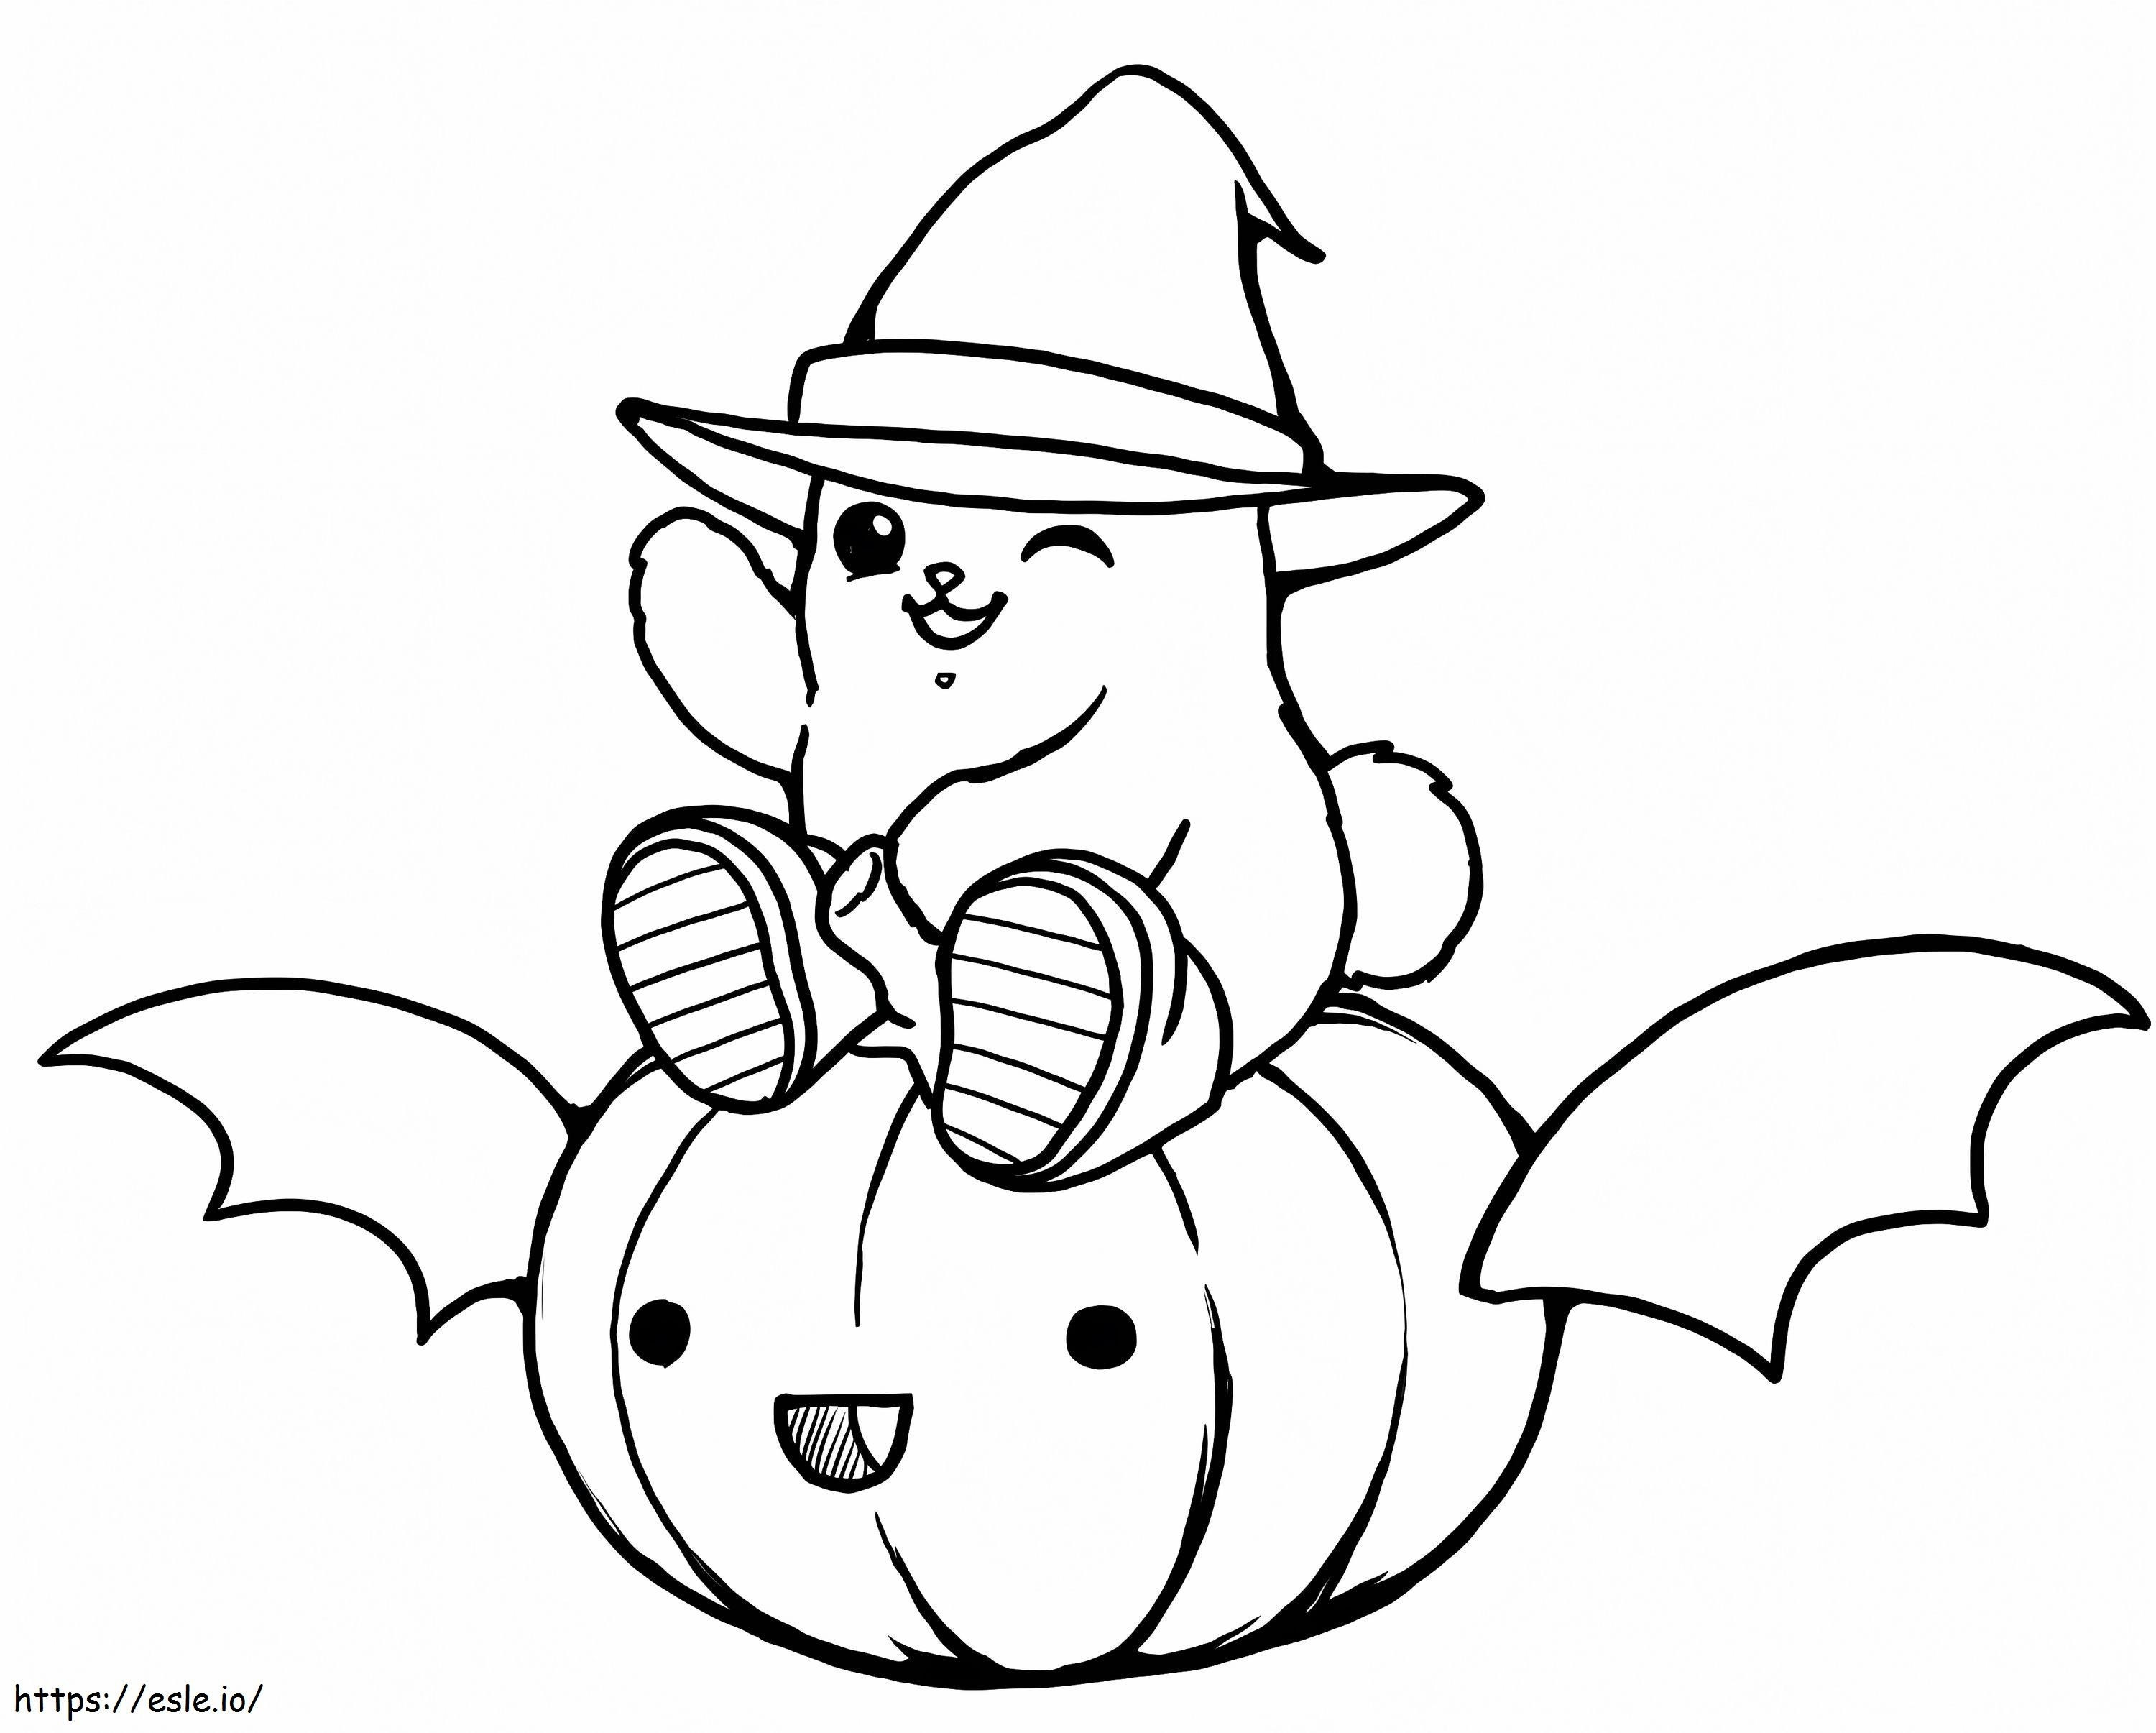 Most Halloween coloring page